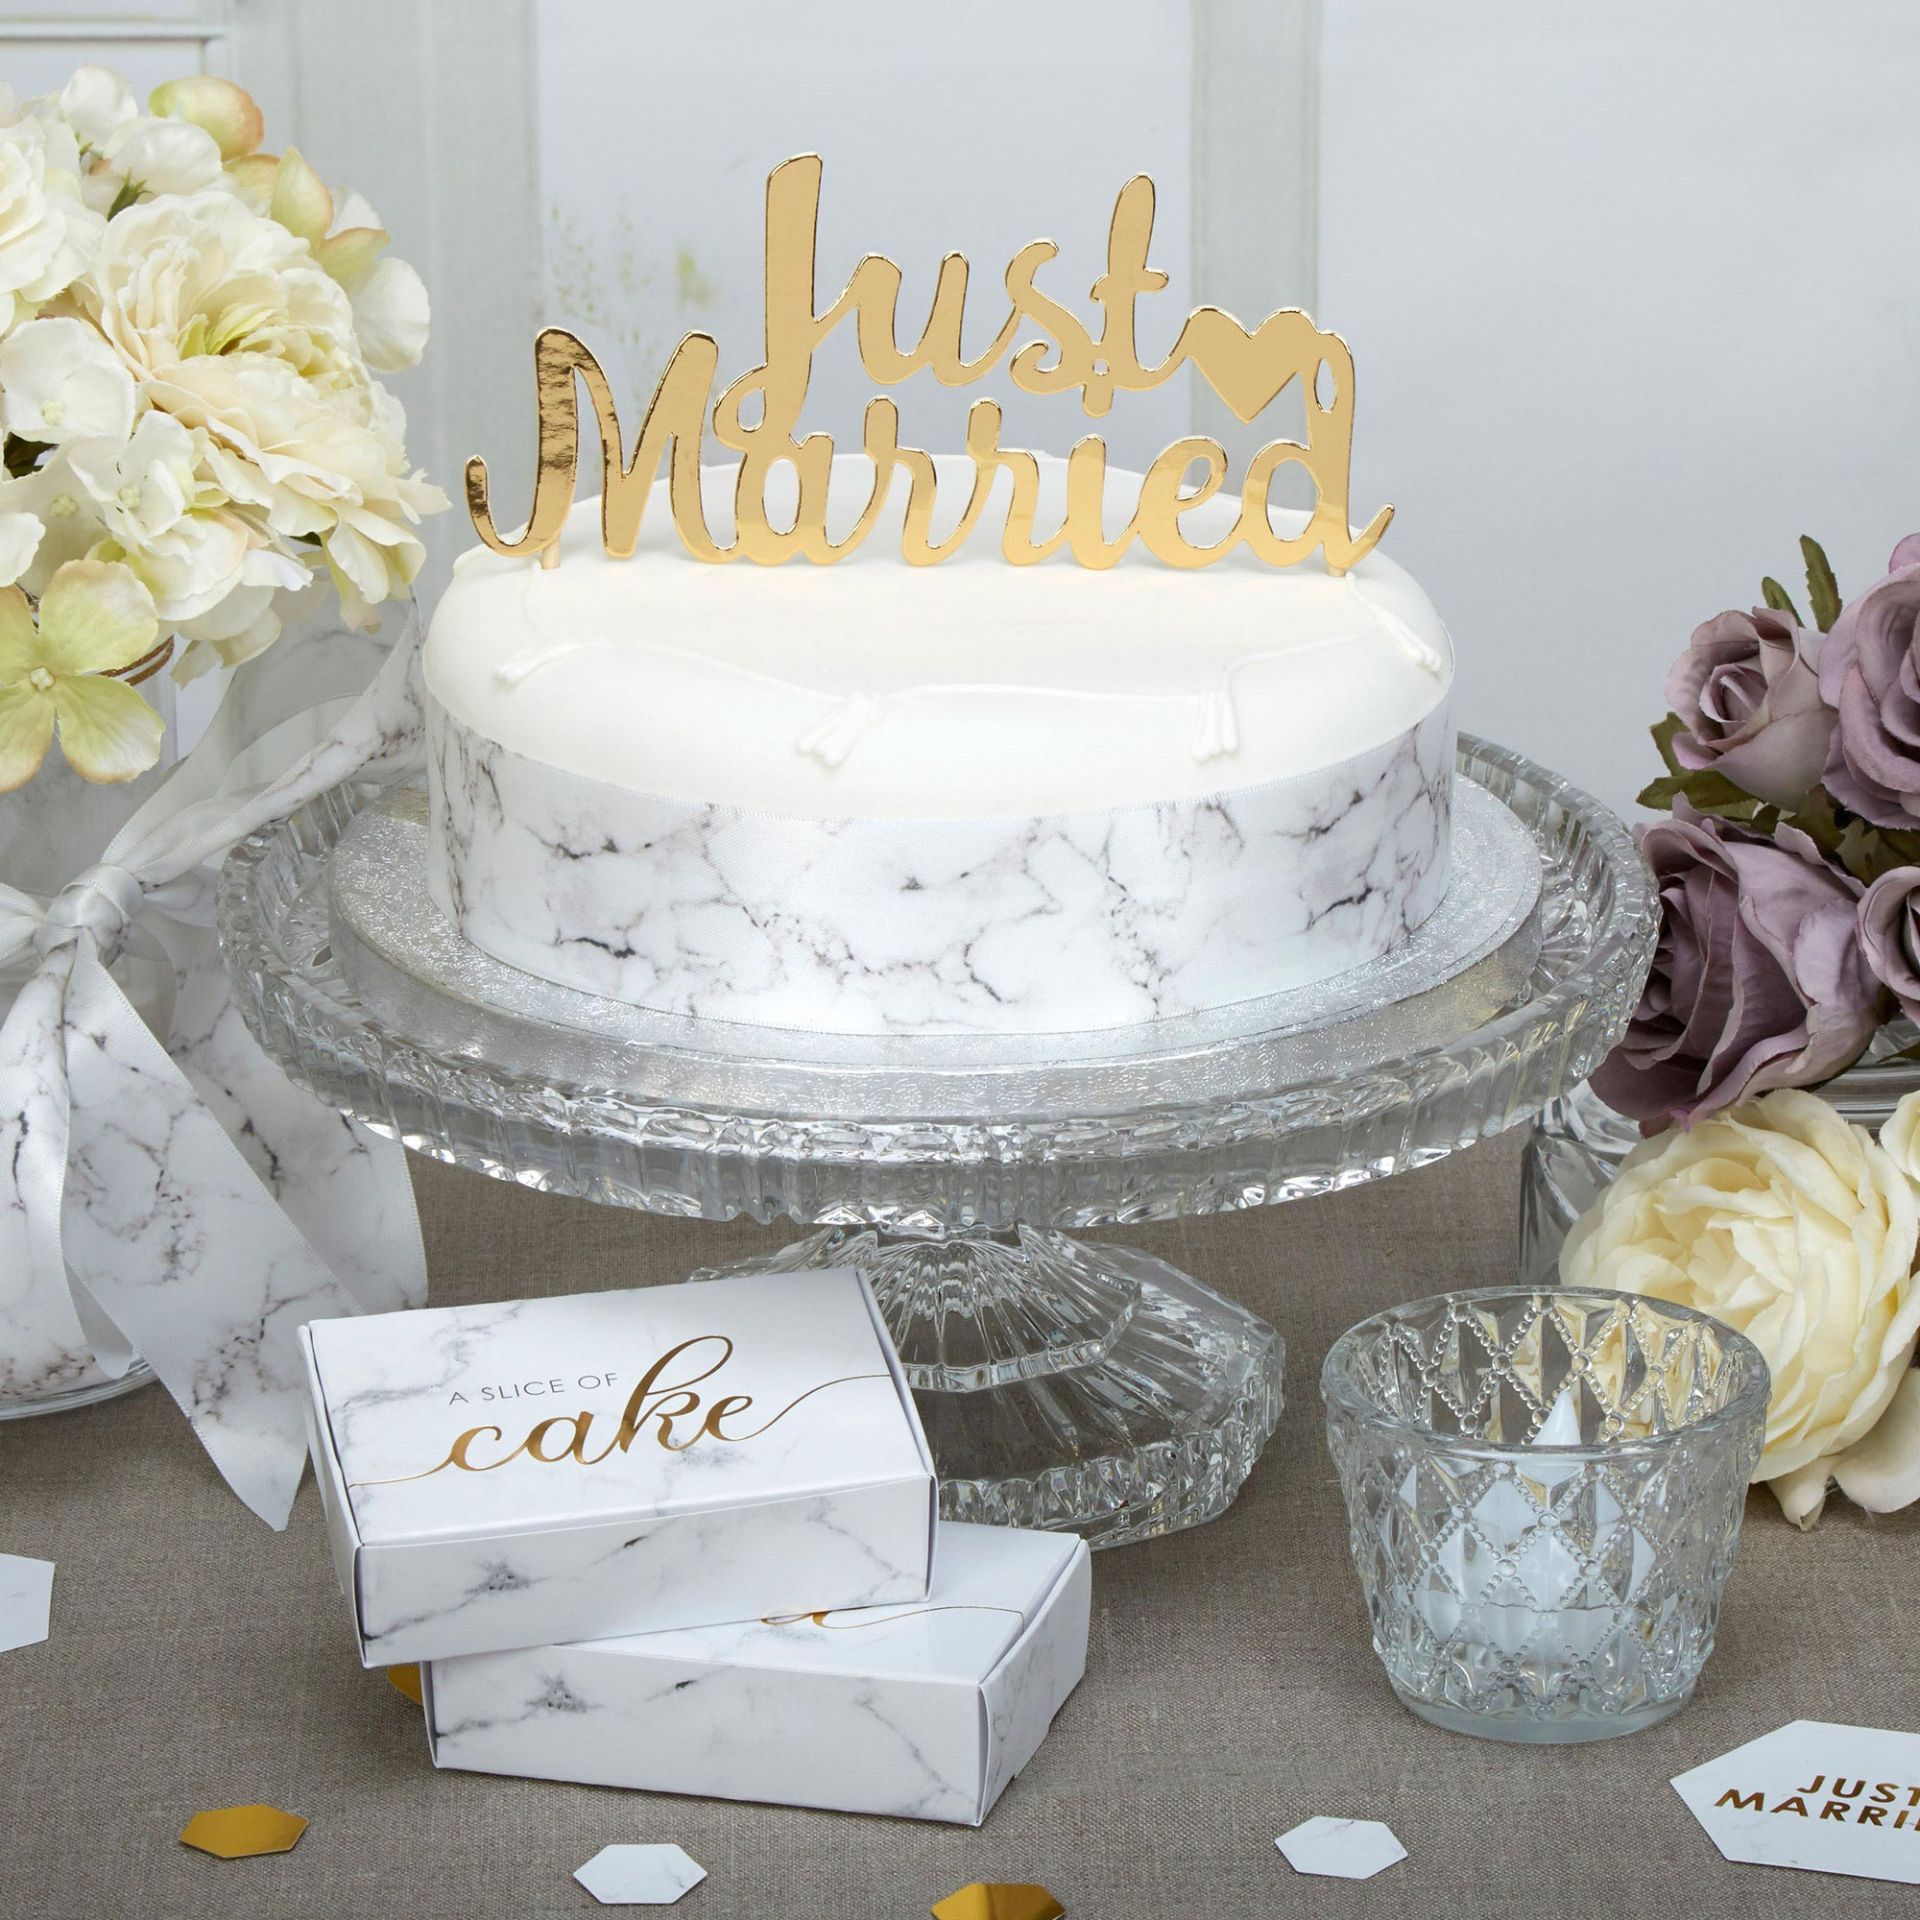 600 x Scripted Marble Just Married Gold Cake Toppers - Image 2 of 3